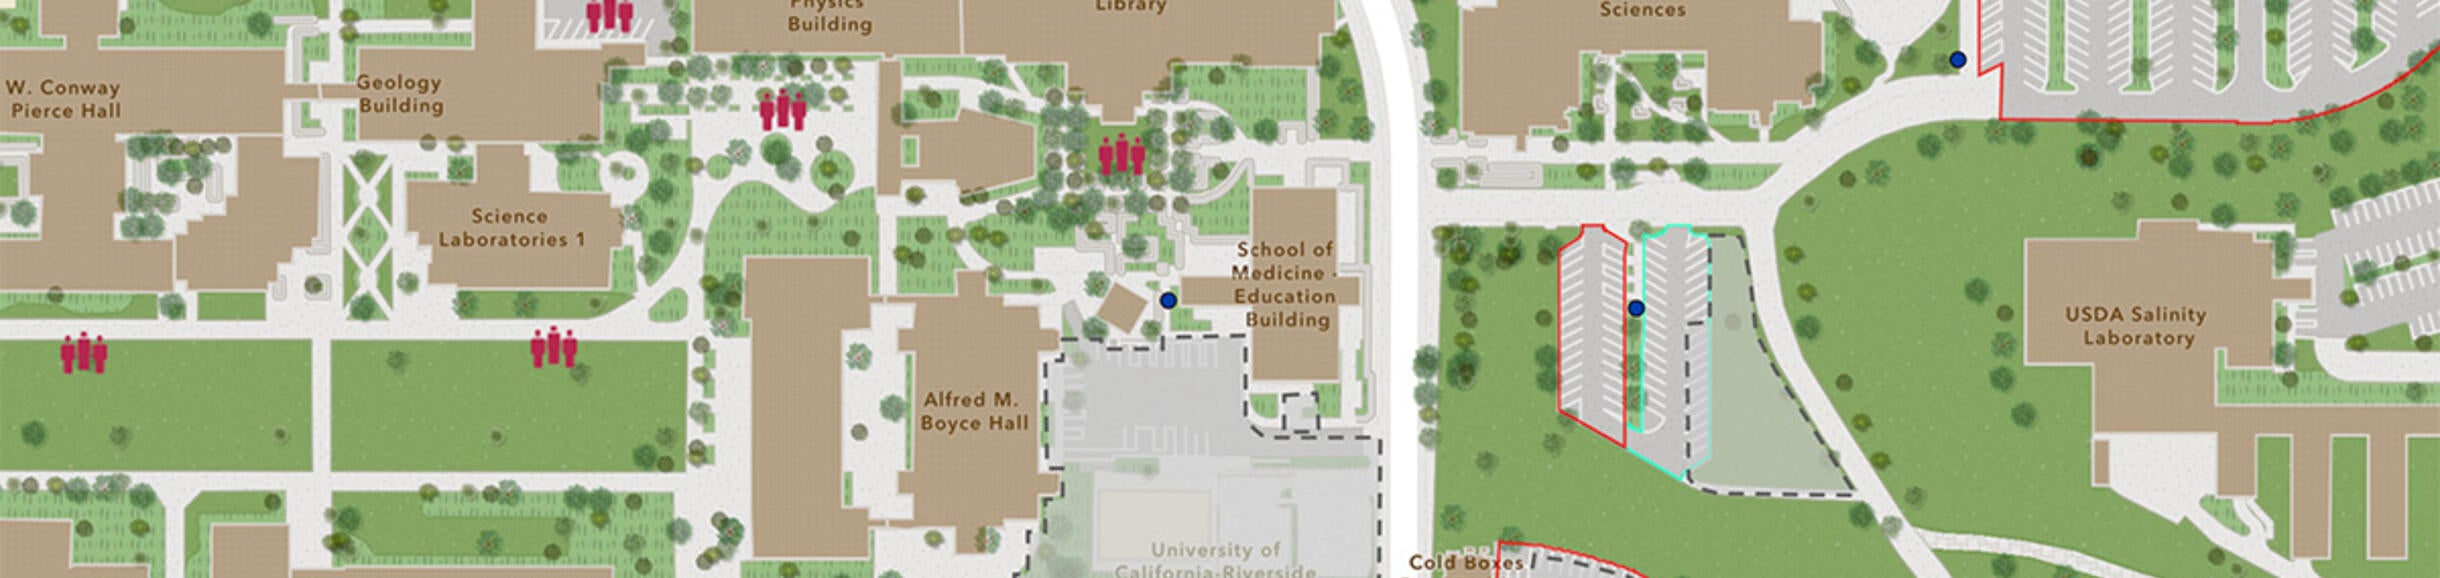 map of the UCR campus around the School of Medicine with the evacuation zones noted.